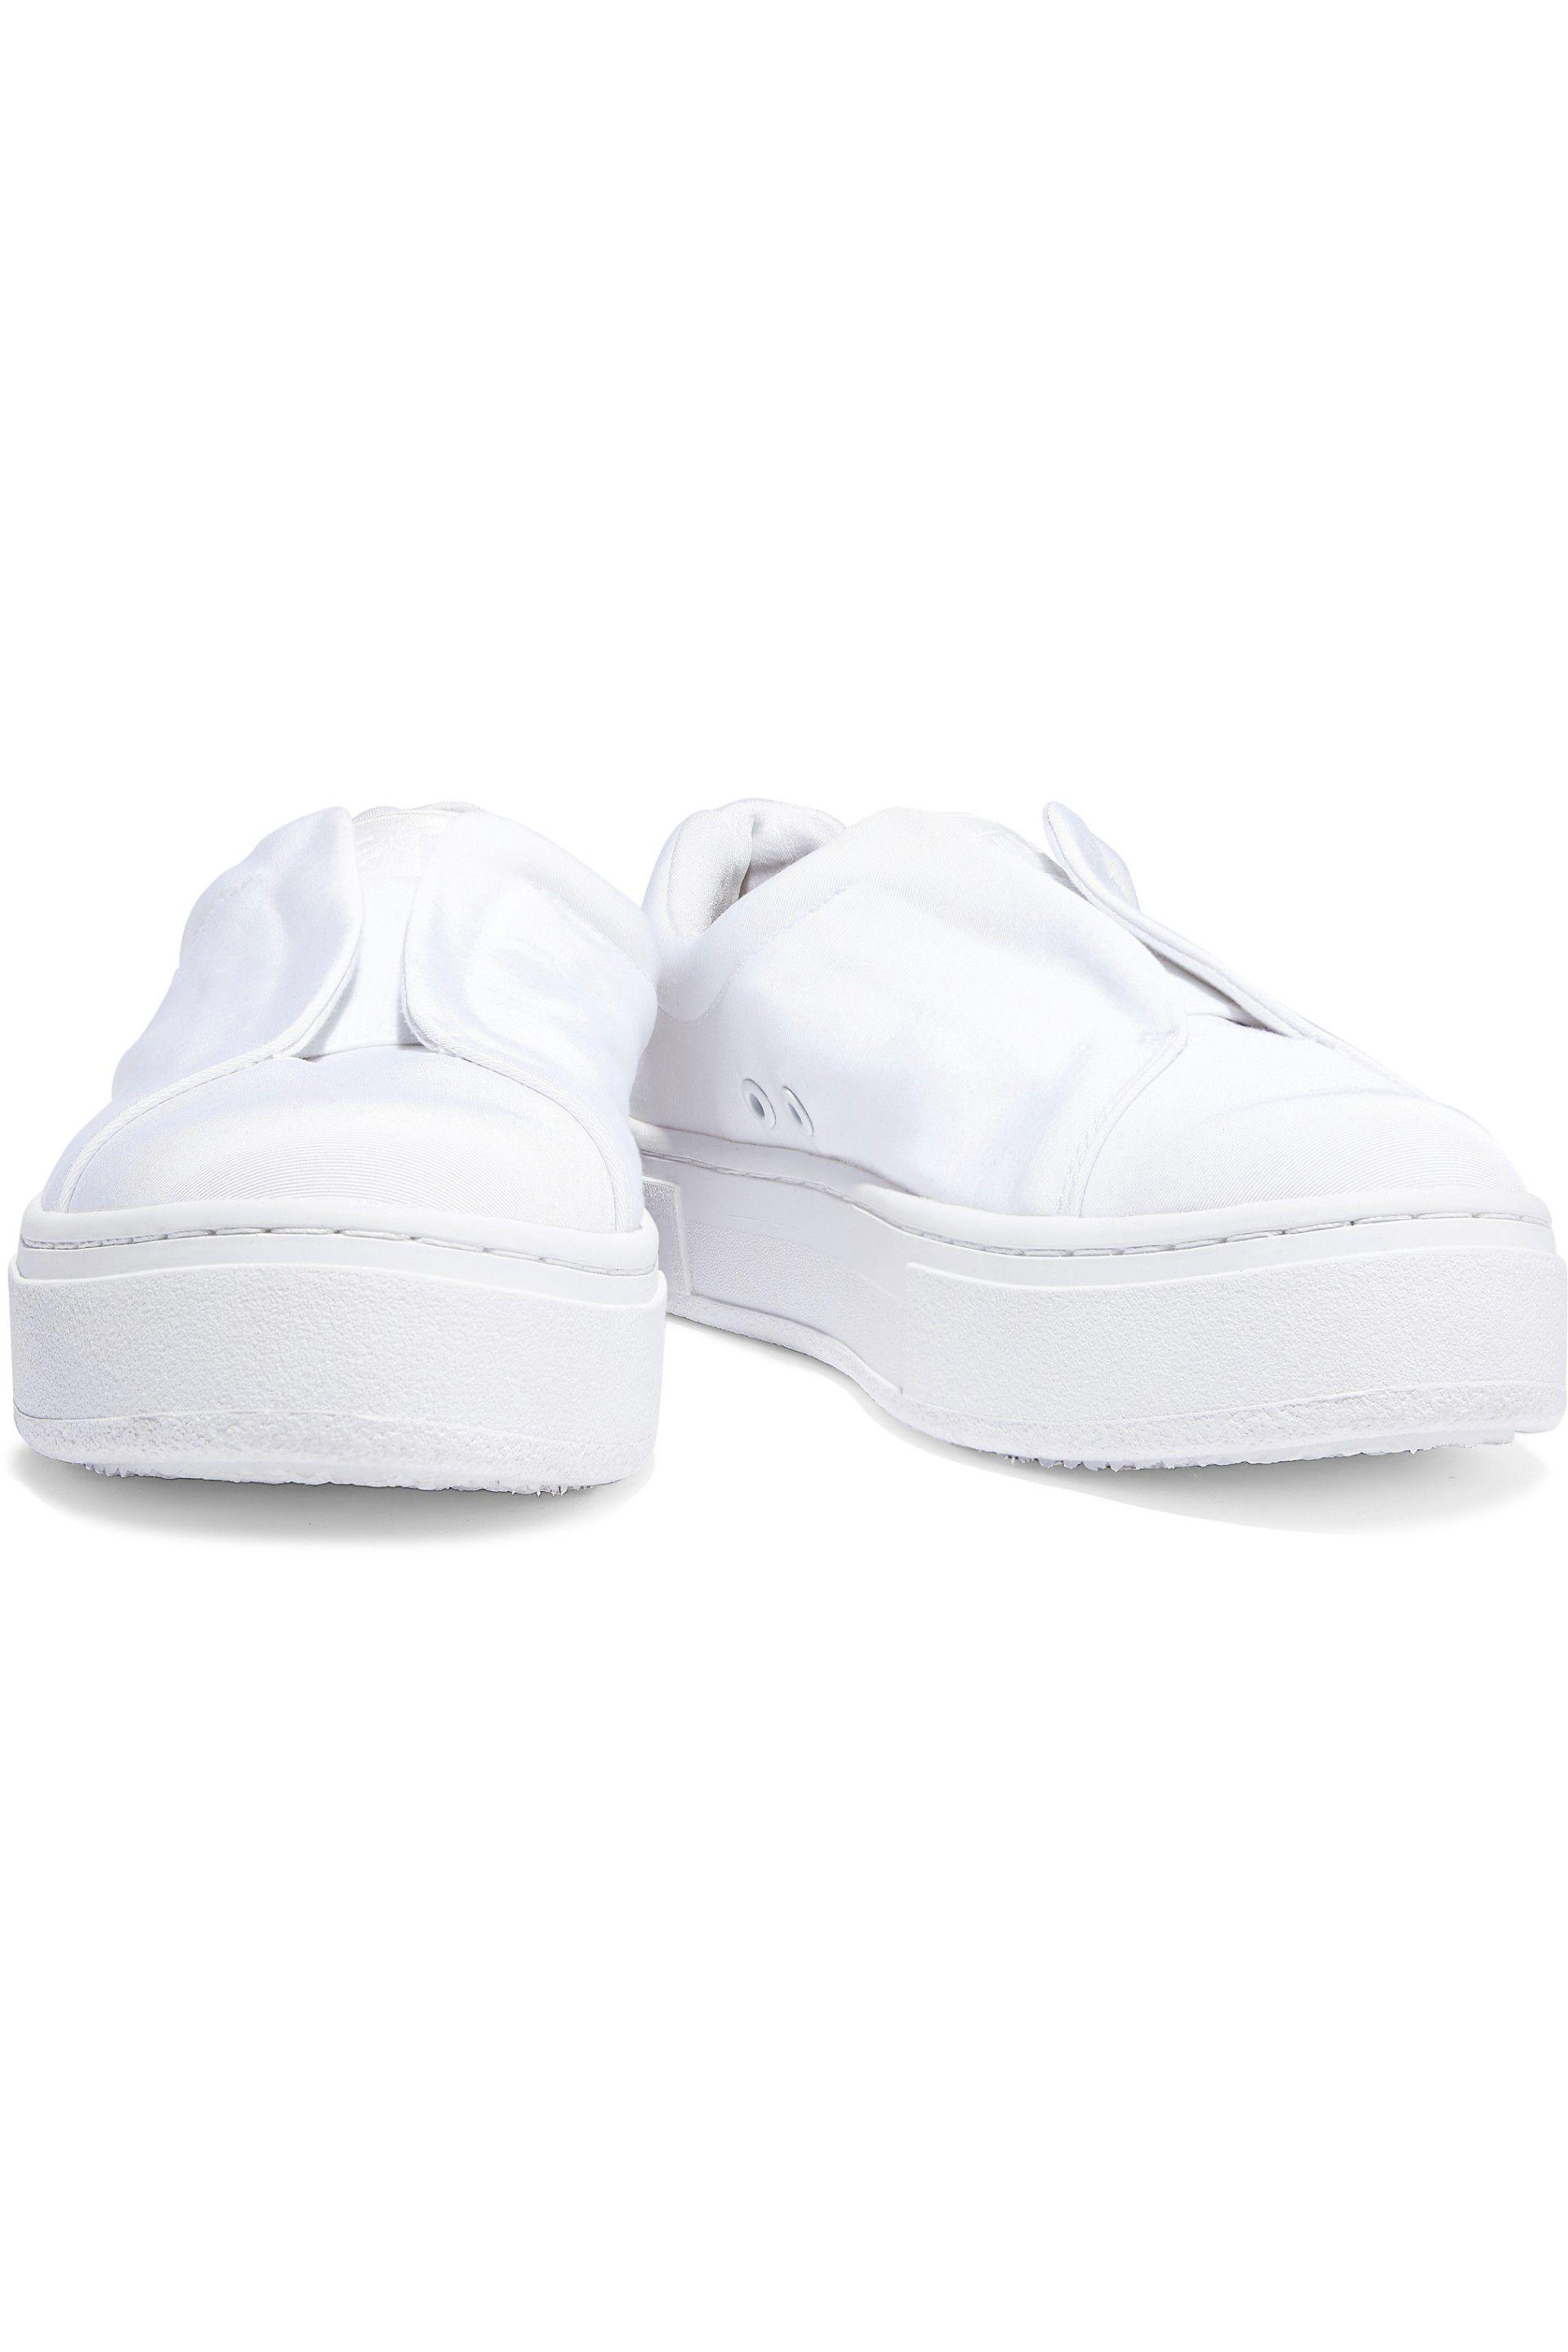 Eytys Leather Laceless Sneakers in White - Lyst